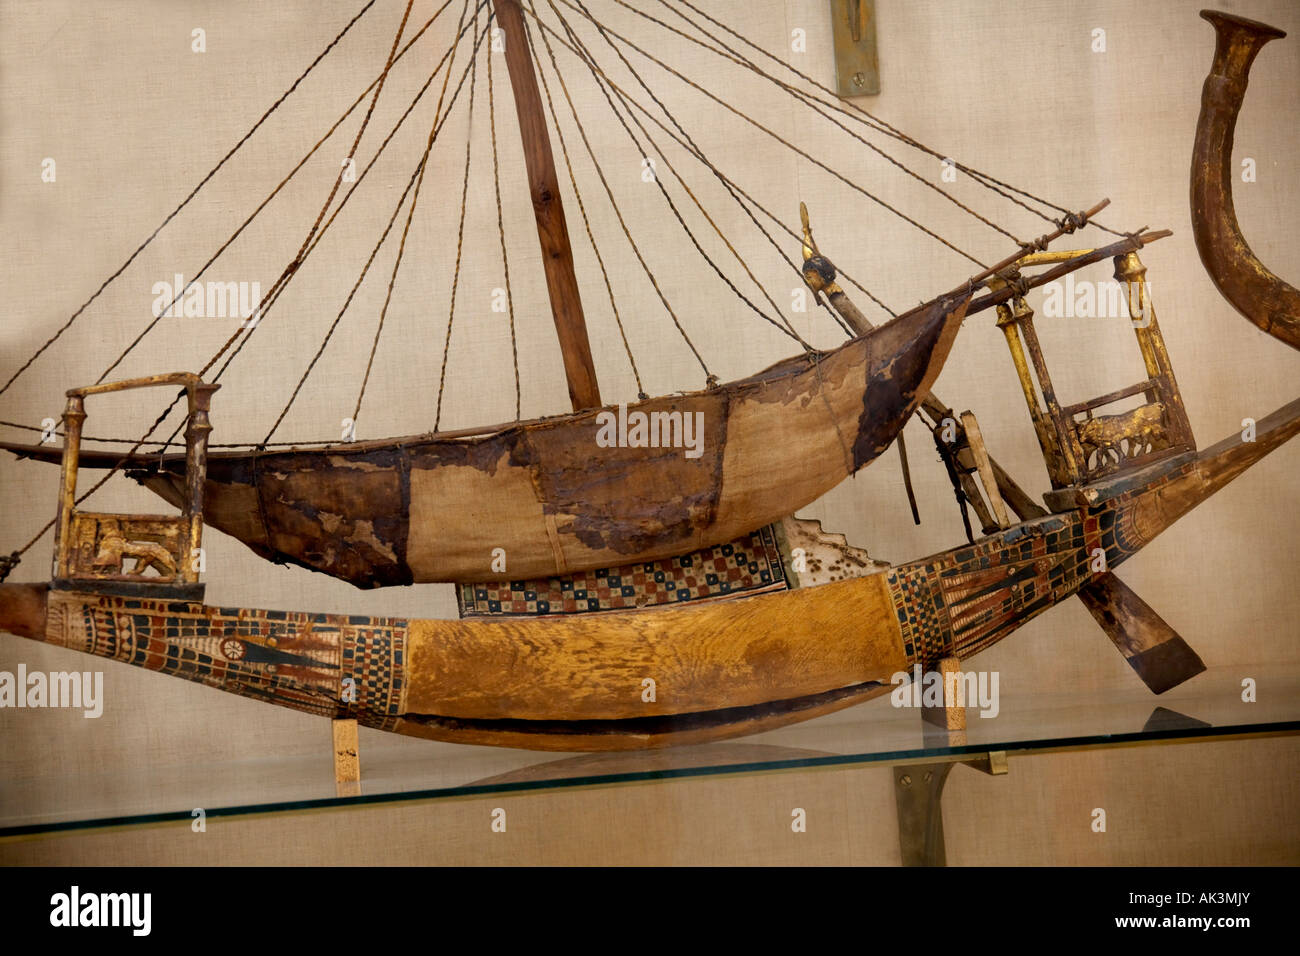 Ancient Egyptian ship or boat artifact from tomb of Pharaoh King Tutankhamun on display at the Egyptian Museum Cairo Egypt Stock Photo